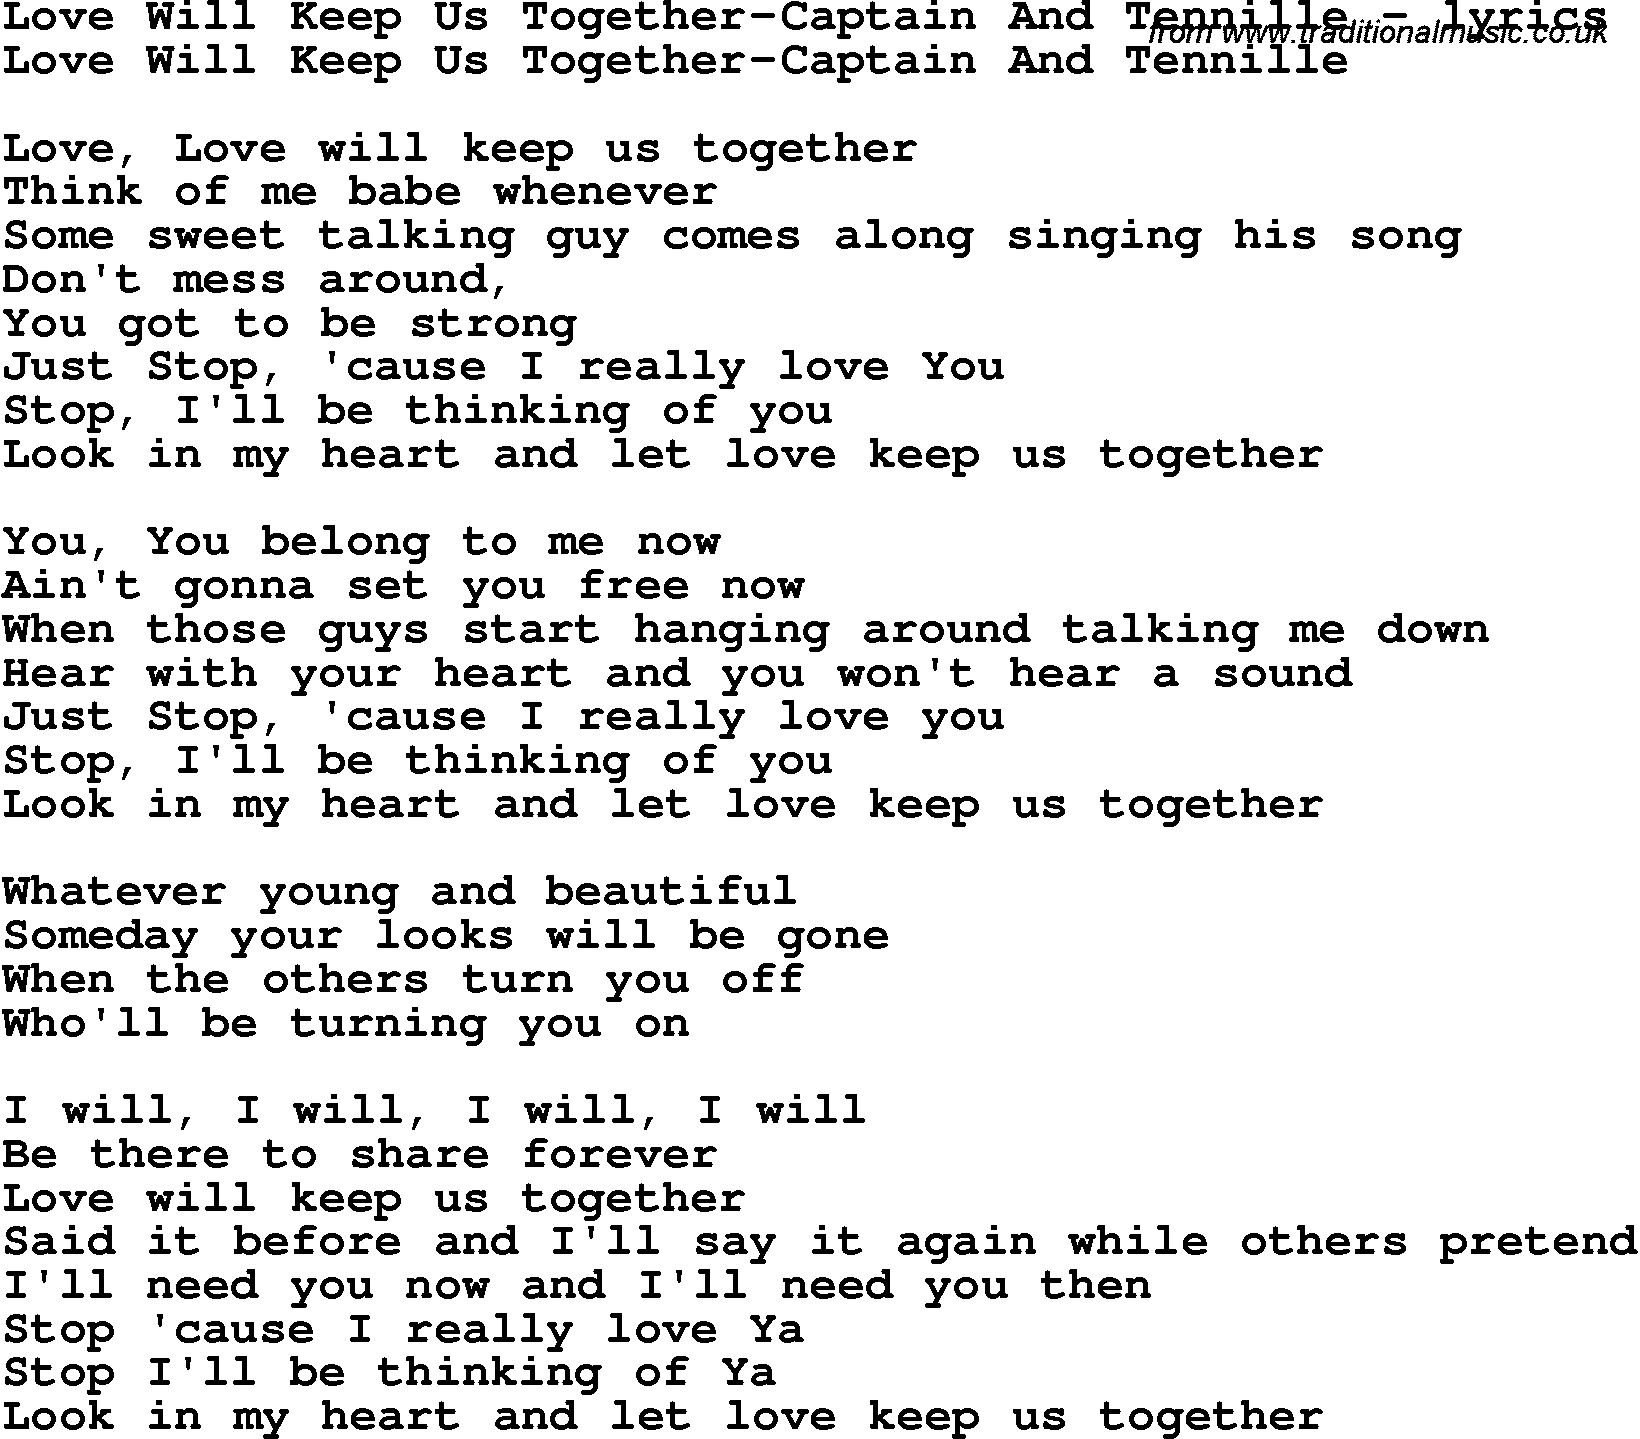 Love Song Lyrics For Love Will Keep Us Together Captain And Tennille